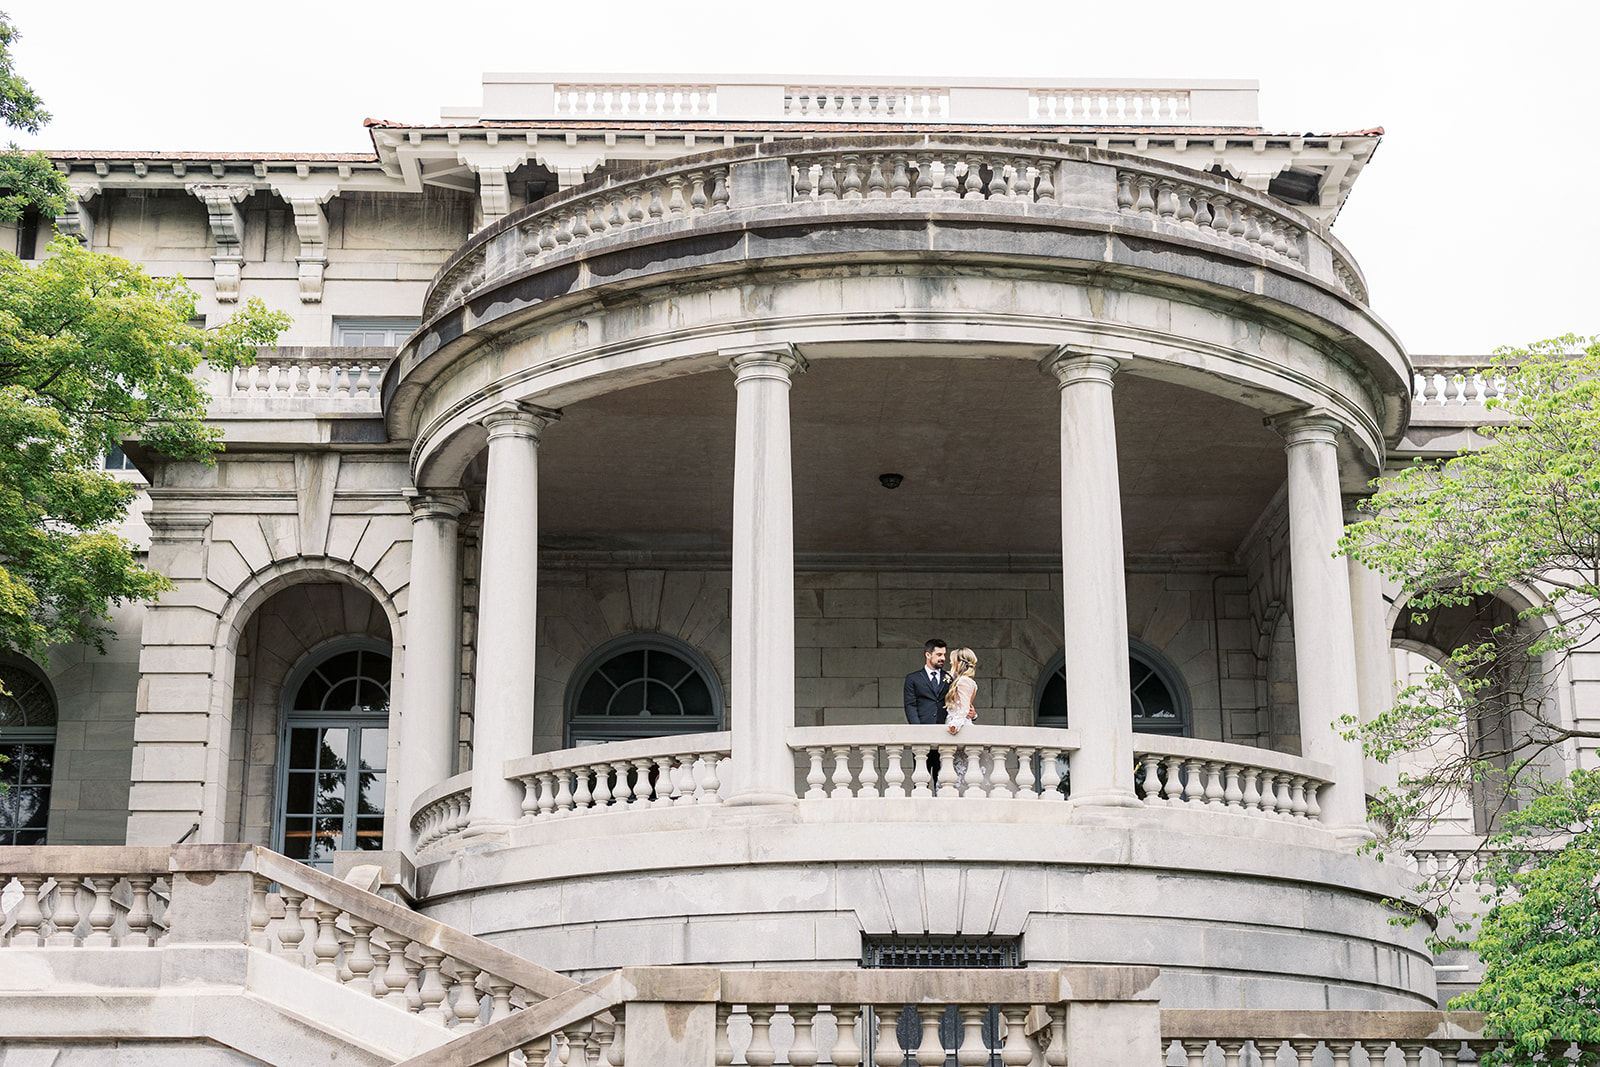 Newlyweds share a moment together on a large terrace overlooking the grounds of the Elkins Estate